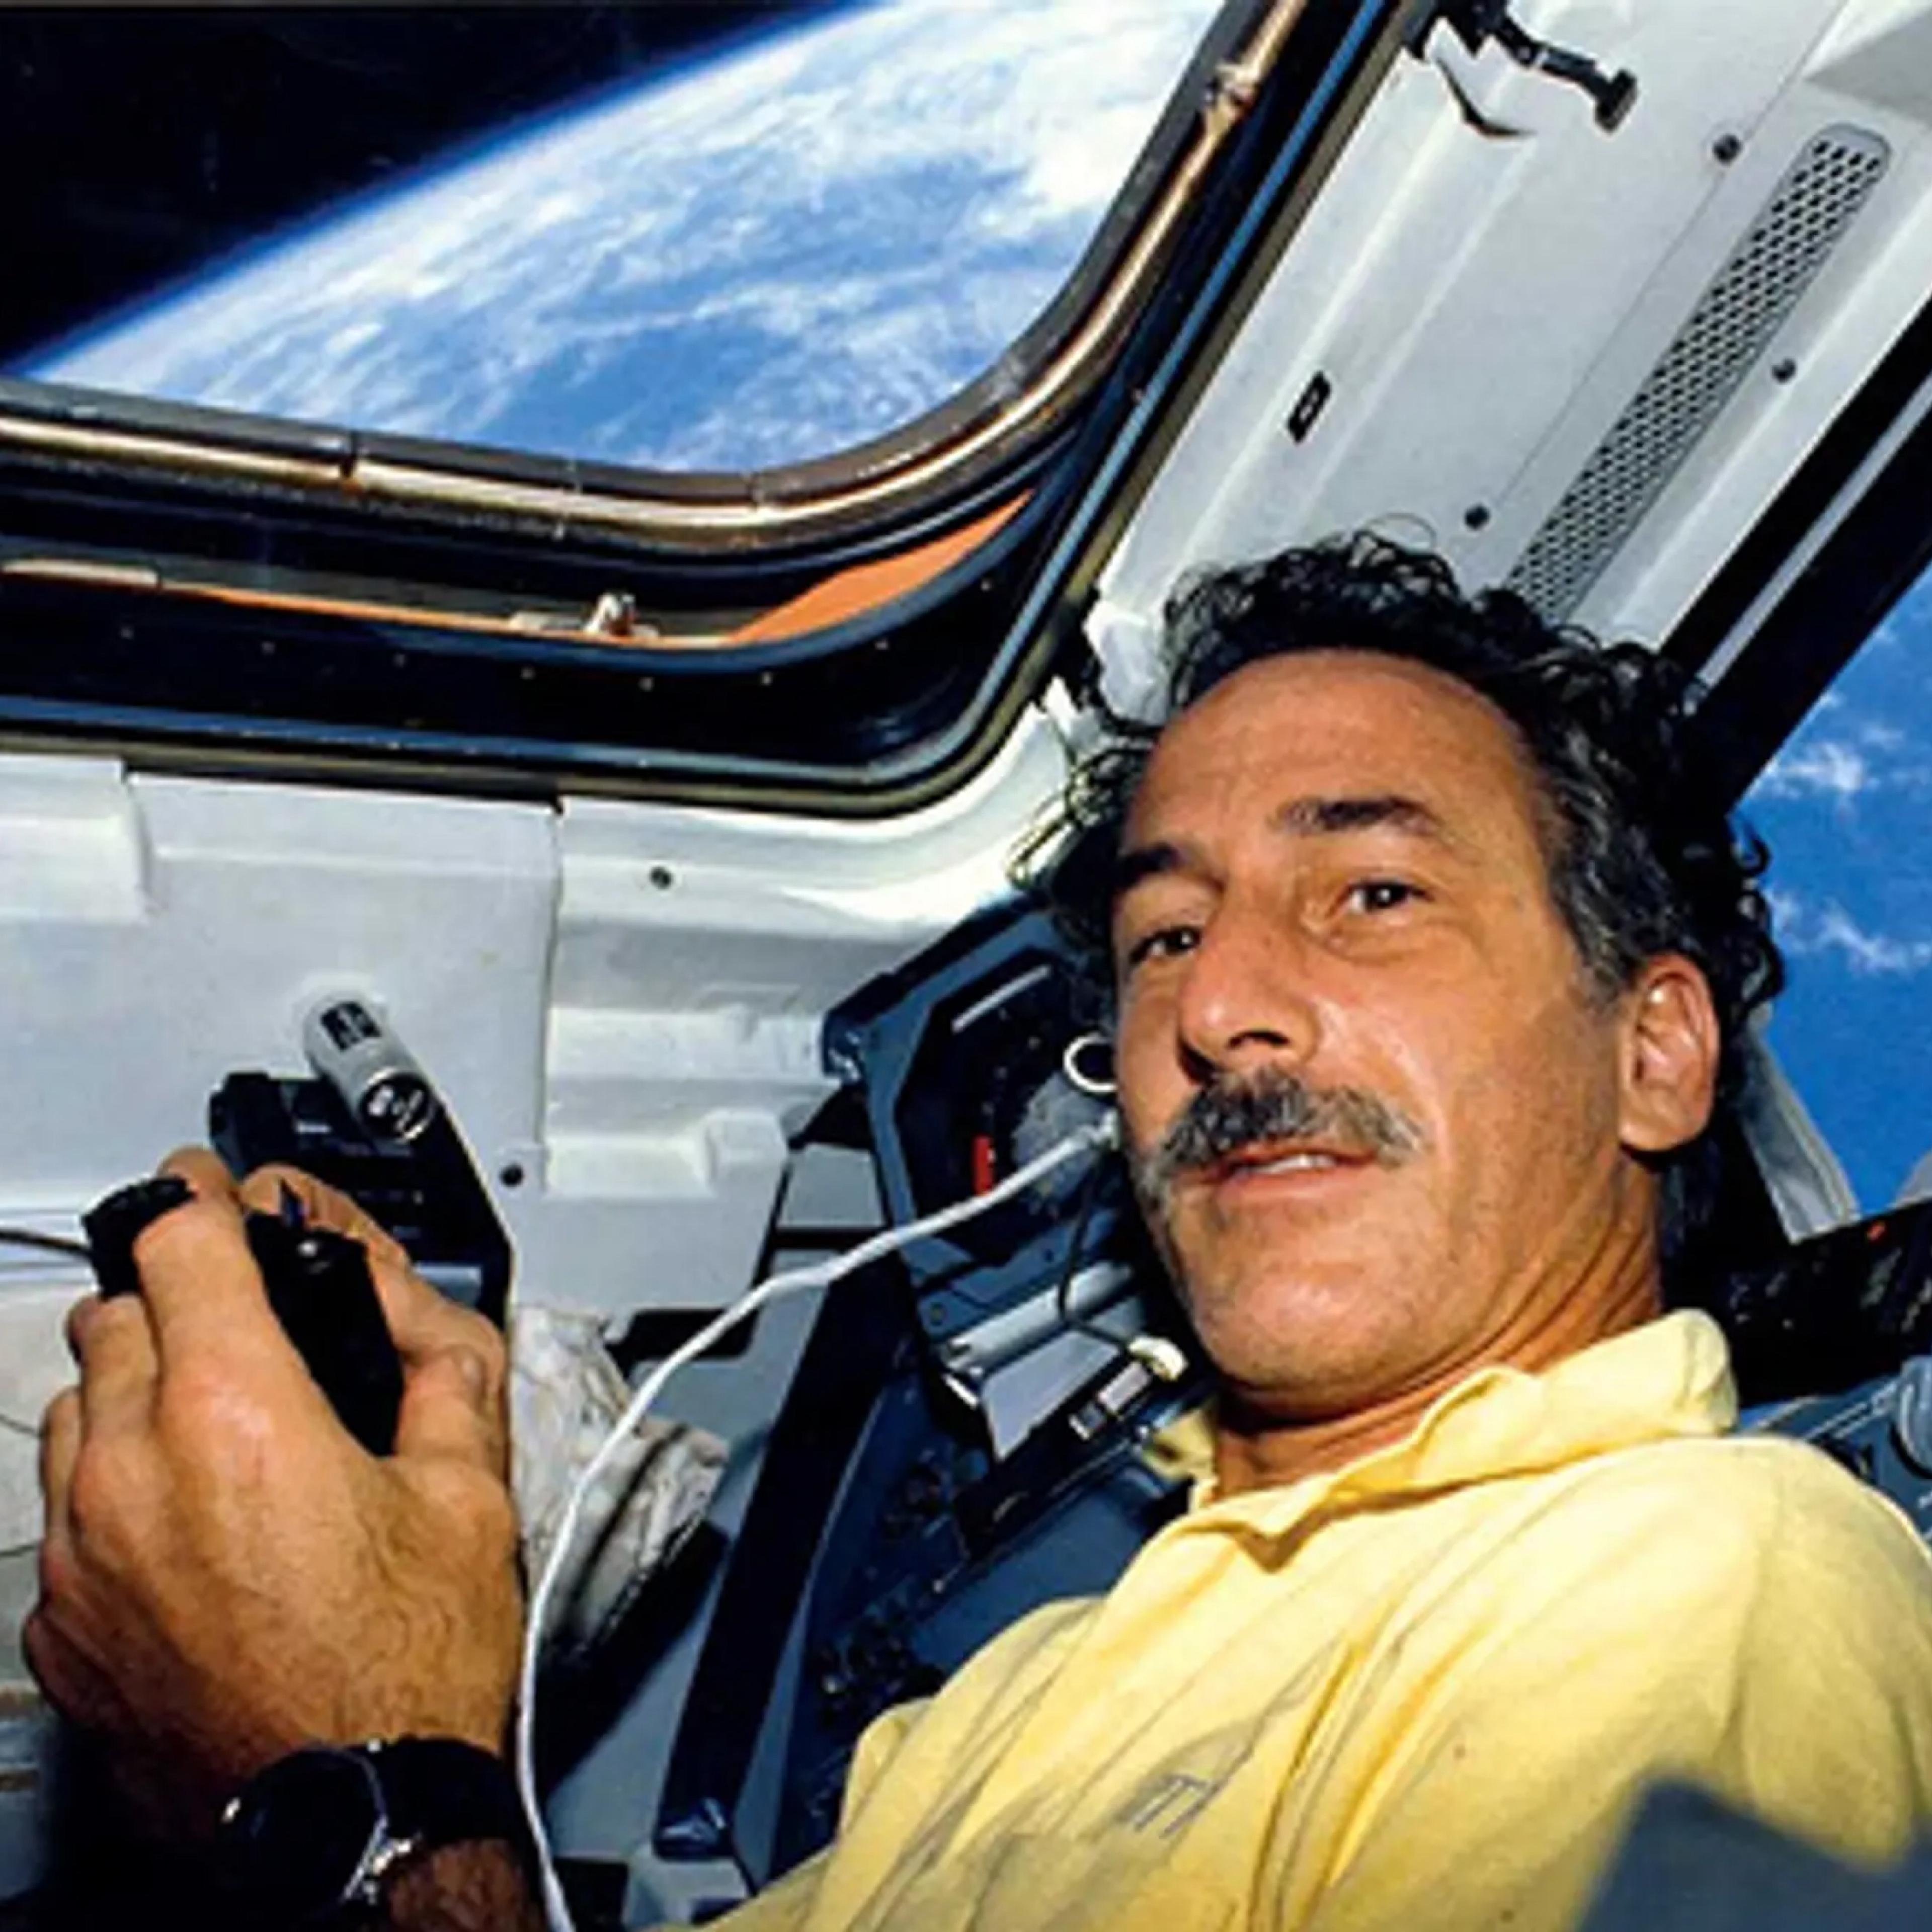 Astronaut Jeff Hoffman reflects on his time in space and his altered perspective.